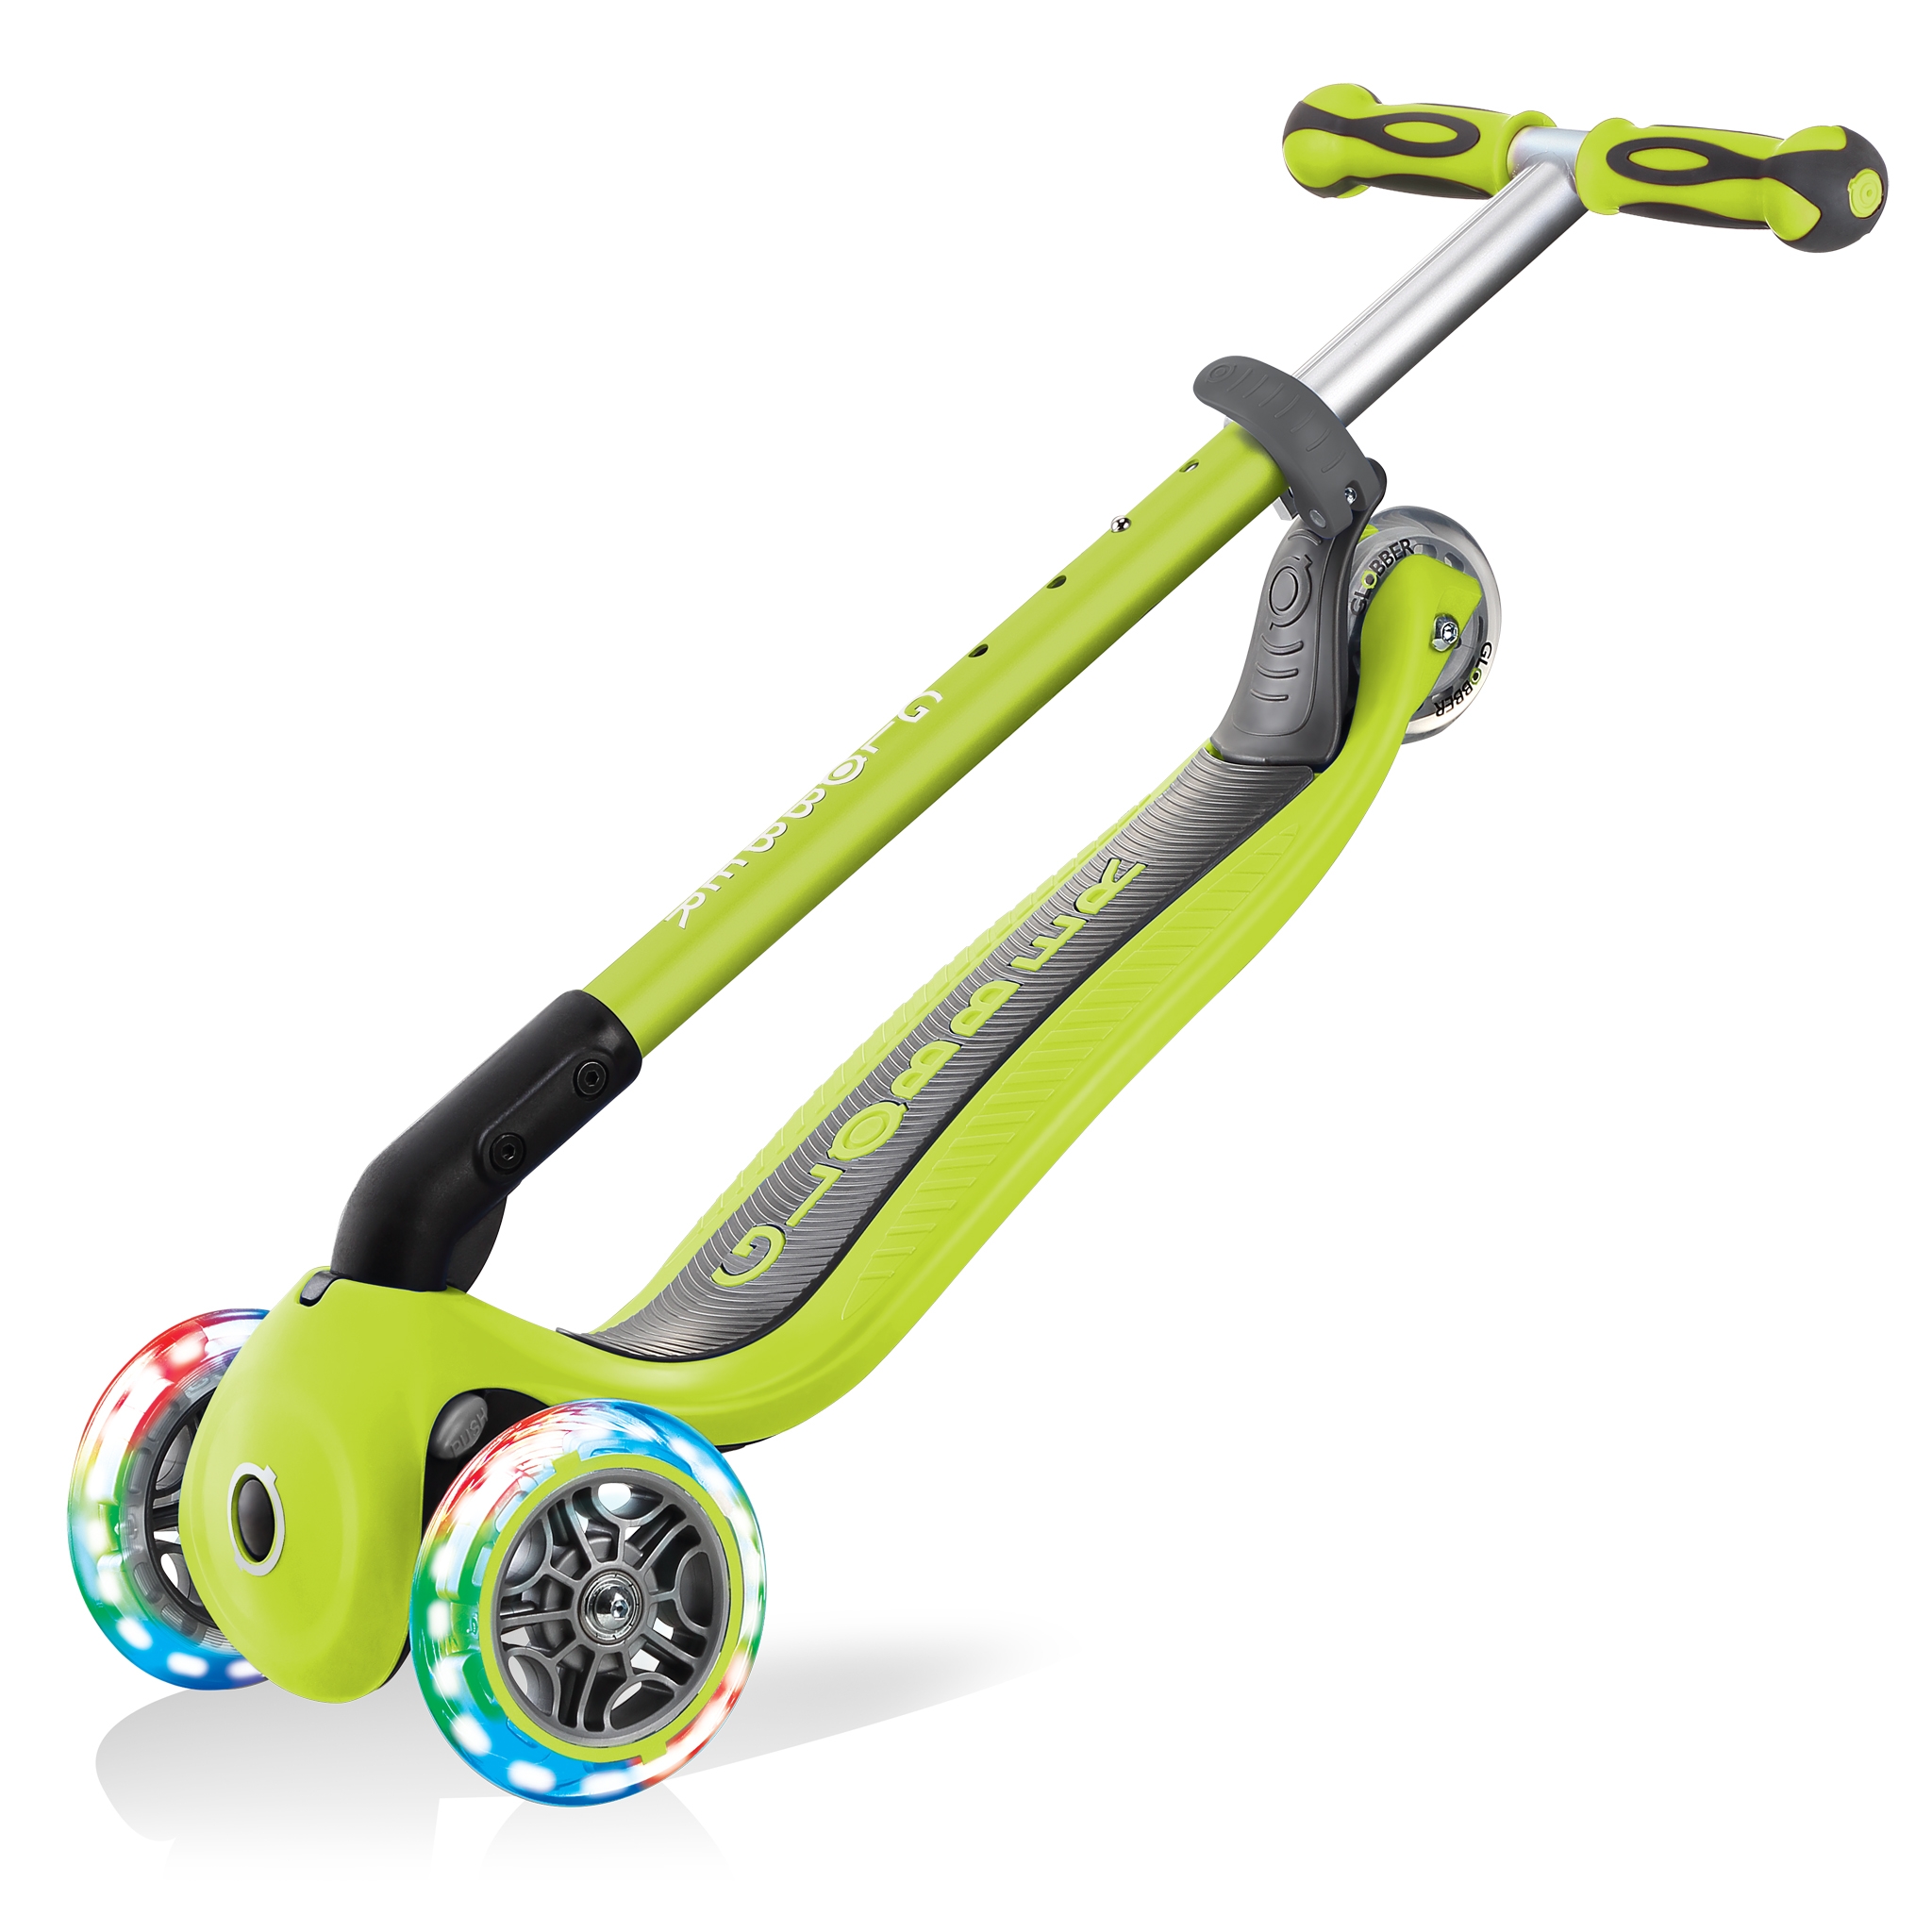 GO-UP-DELUXE-LIGHTS-ride-on-walking-bike-scooter-with-light-up-wheels-trolley-mode-compatible-lime-green 5